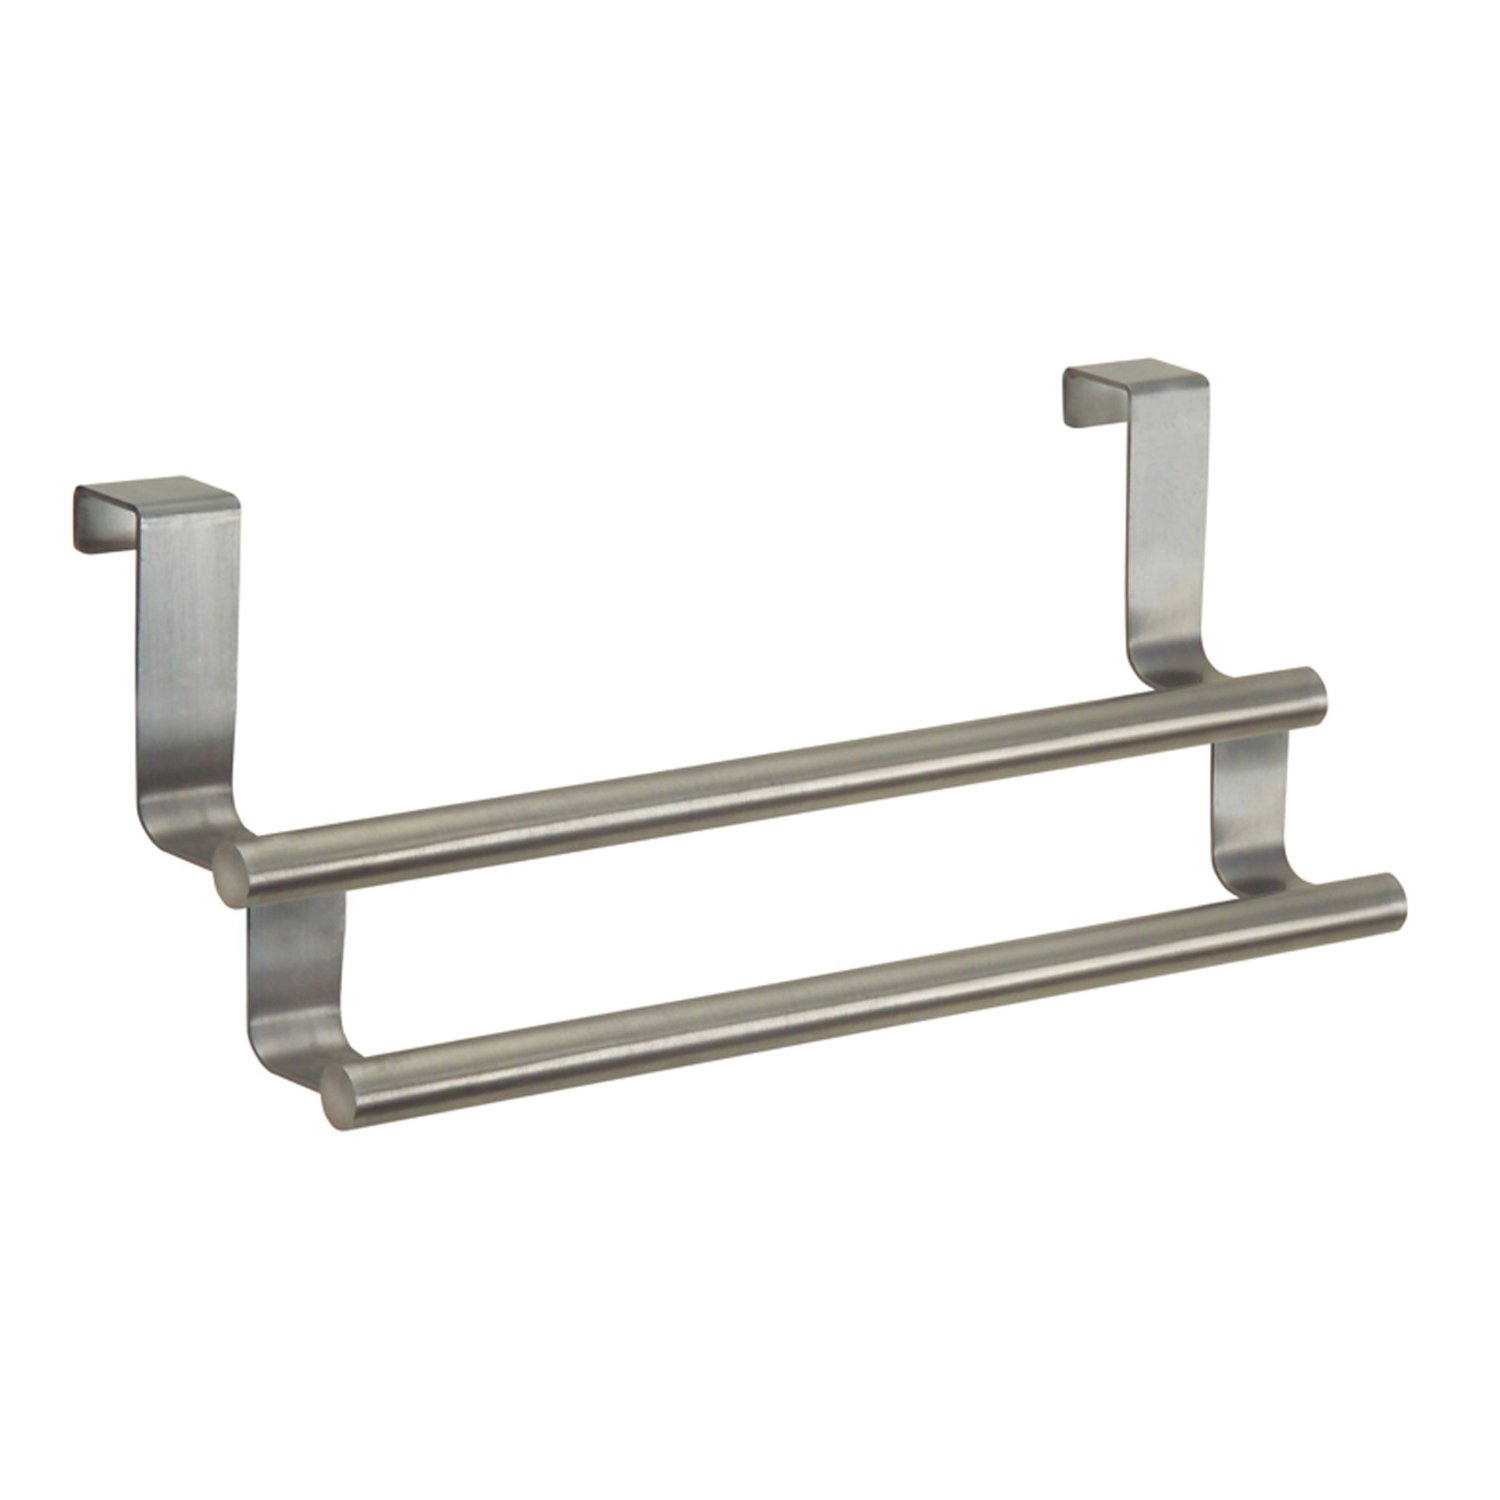 InterDesign 29650 Over The Cabinet Double Towel Bar, Brushed Stainless Steel